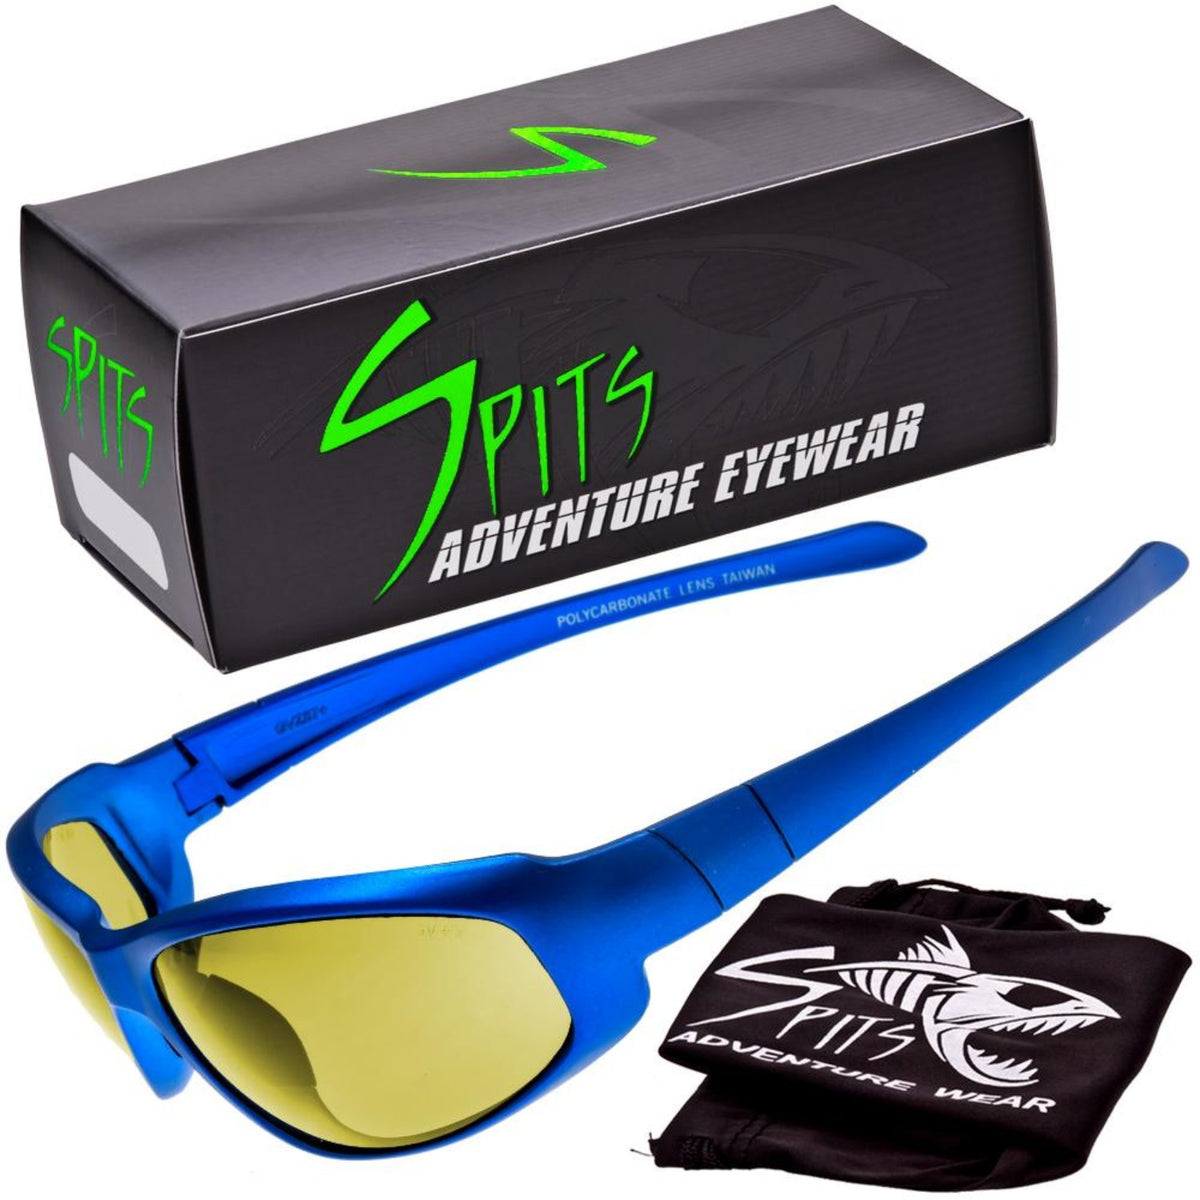 Sniper Blue -  Safety Rated Sunglasses Various Lens Colors, Photochromic and Foam Padding Options